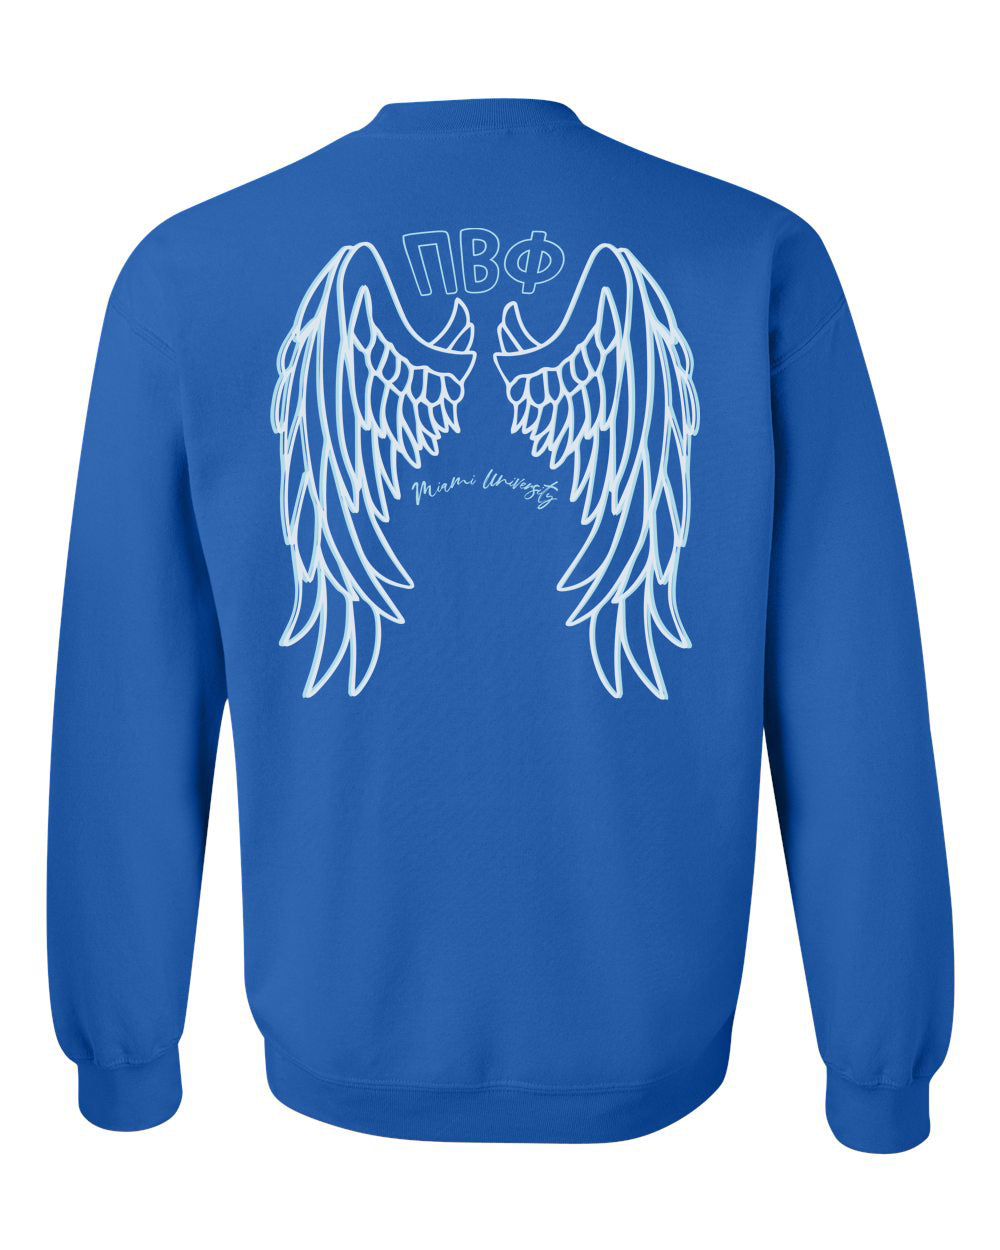 a blue sweatshirt with white wings on it